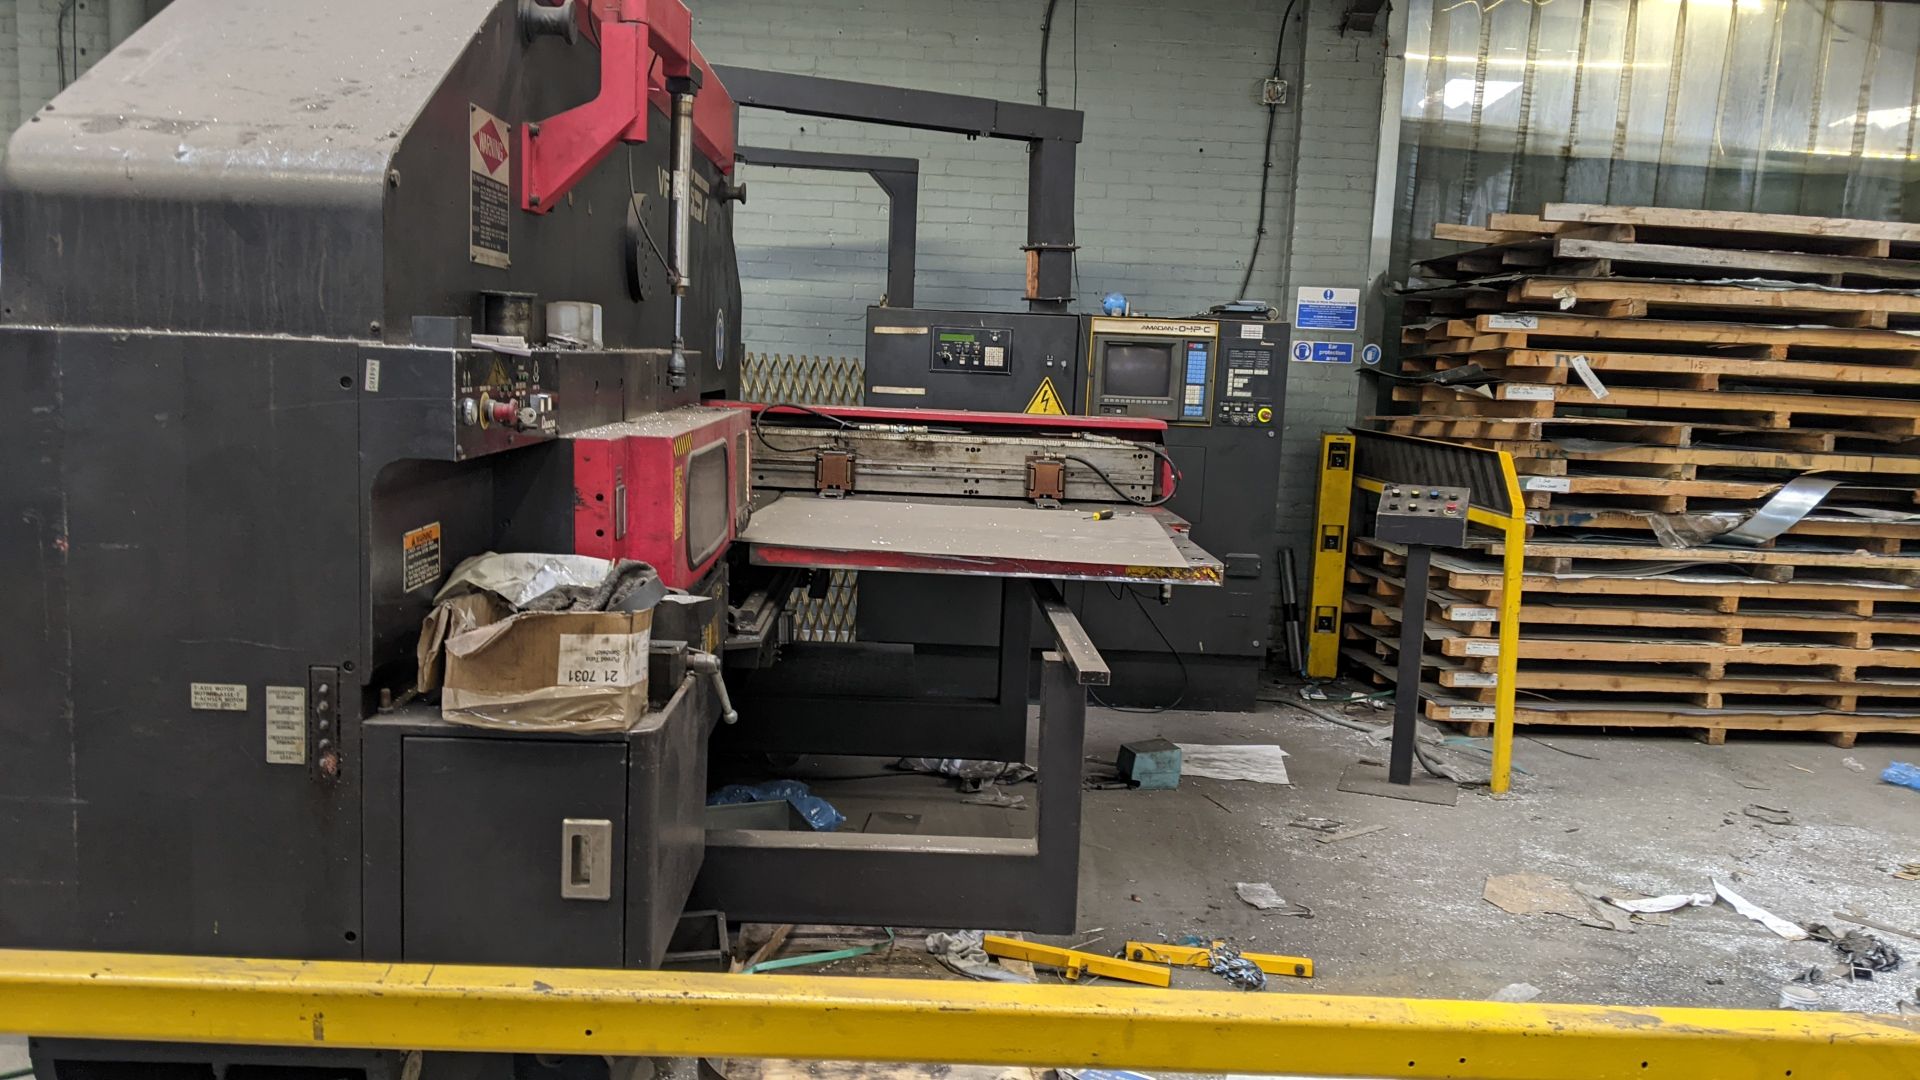 1995 Amada Vipros 357 NC turret punch press, 45 turret stations, 30 ton capacity, serial number 3571 - Image 47 of 51